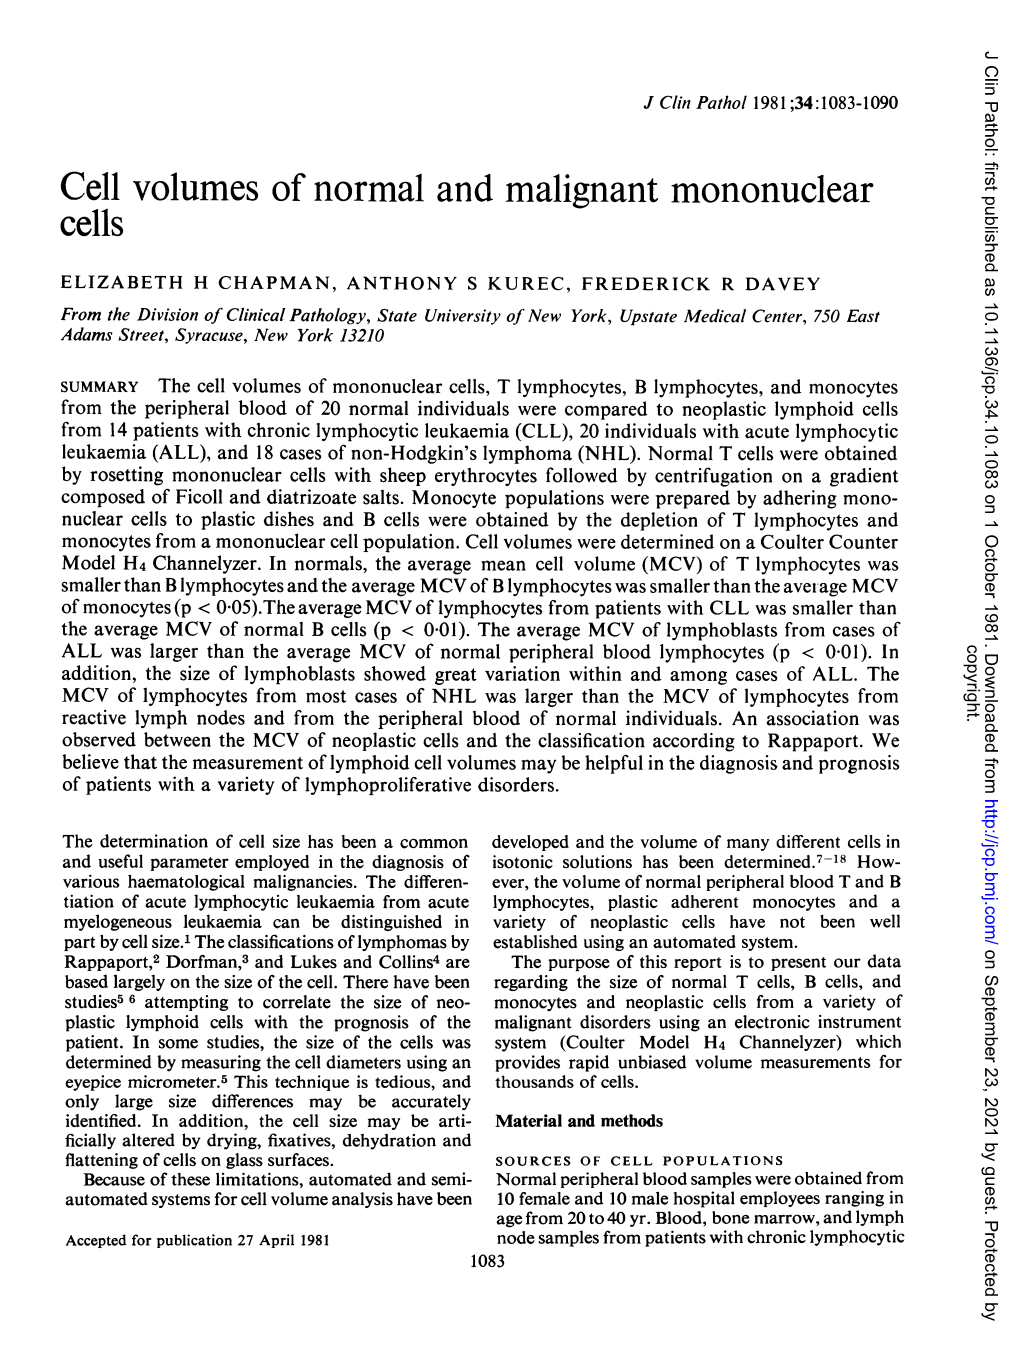 Cell Volumes Ofnormal and Malignantmononuclear